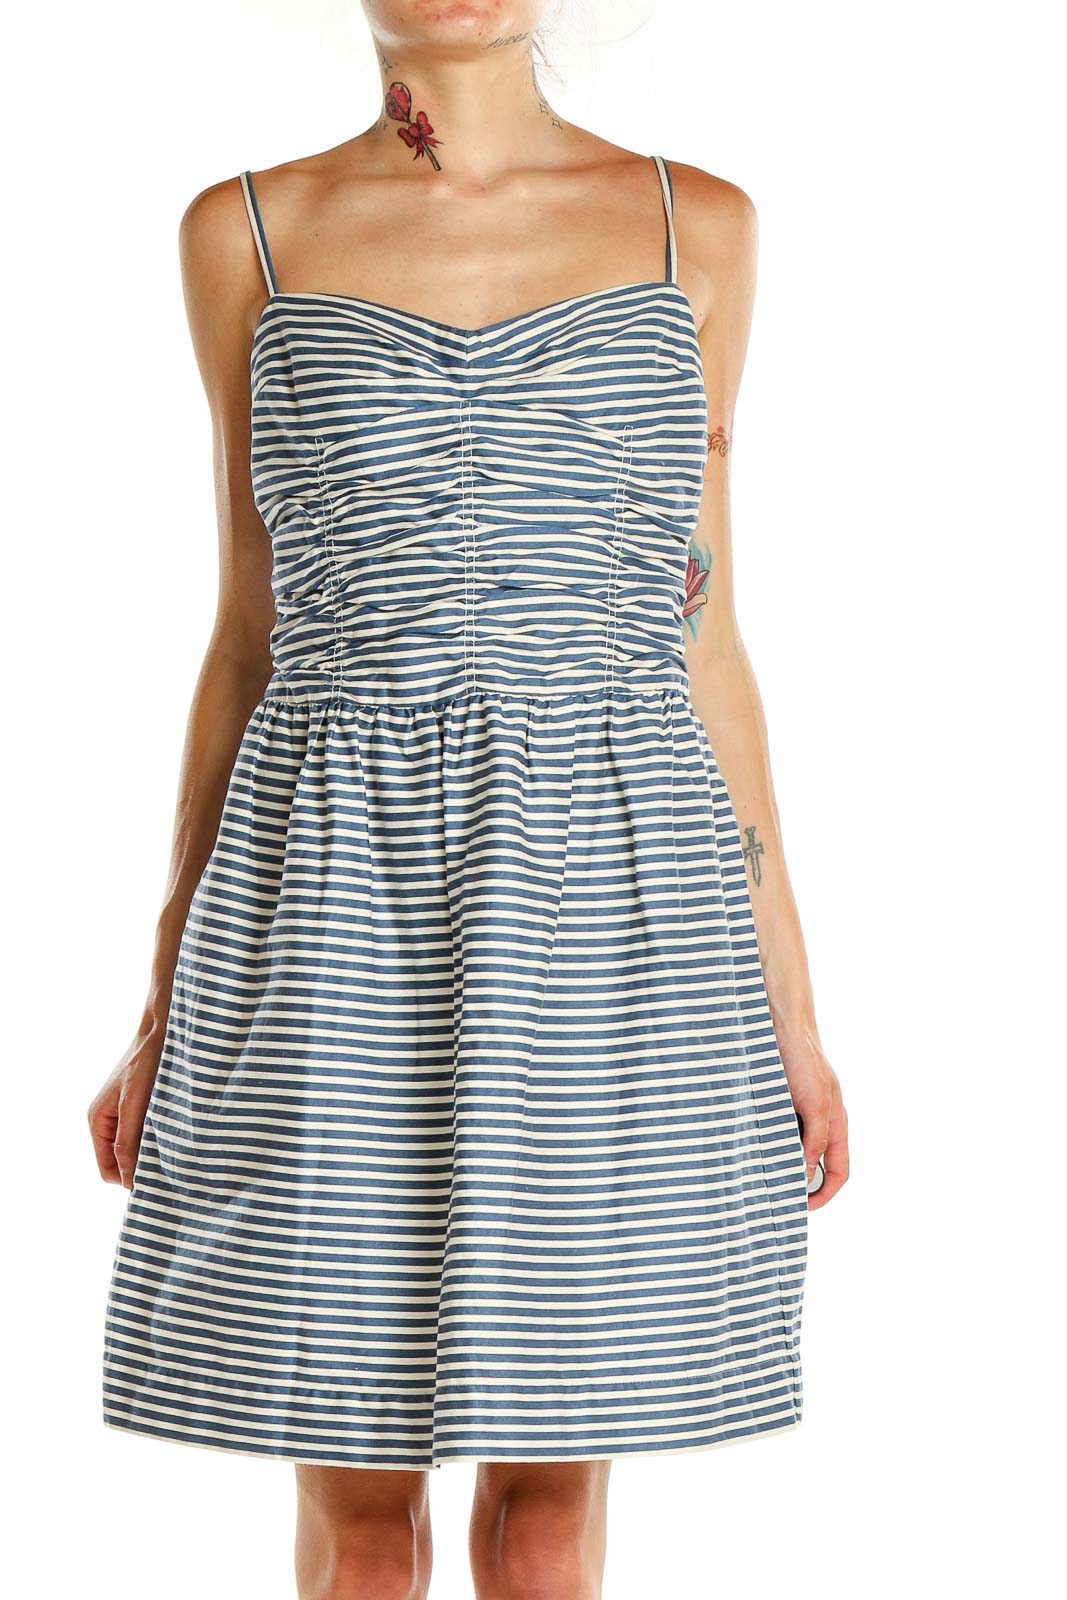 Blue White Striped Fit & Flare Dress Front